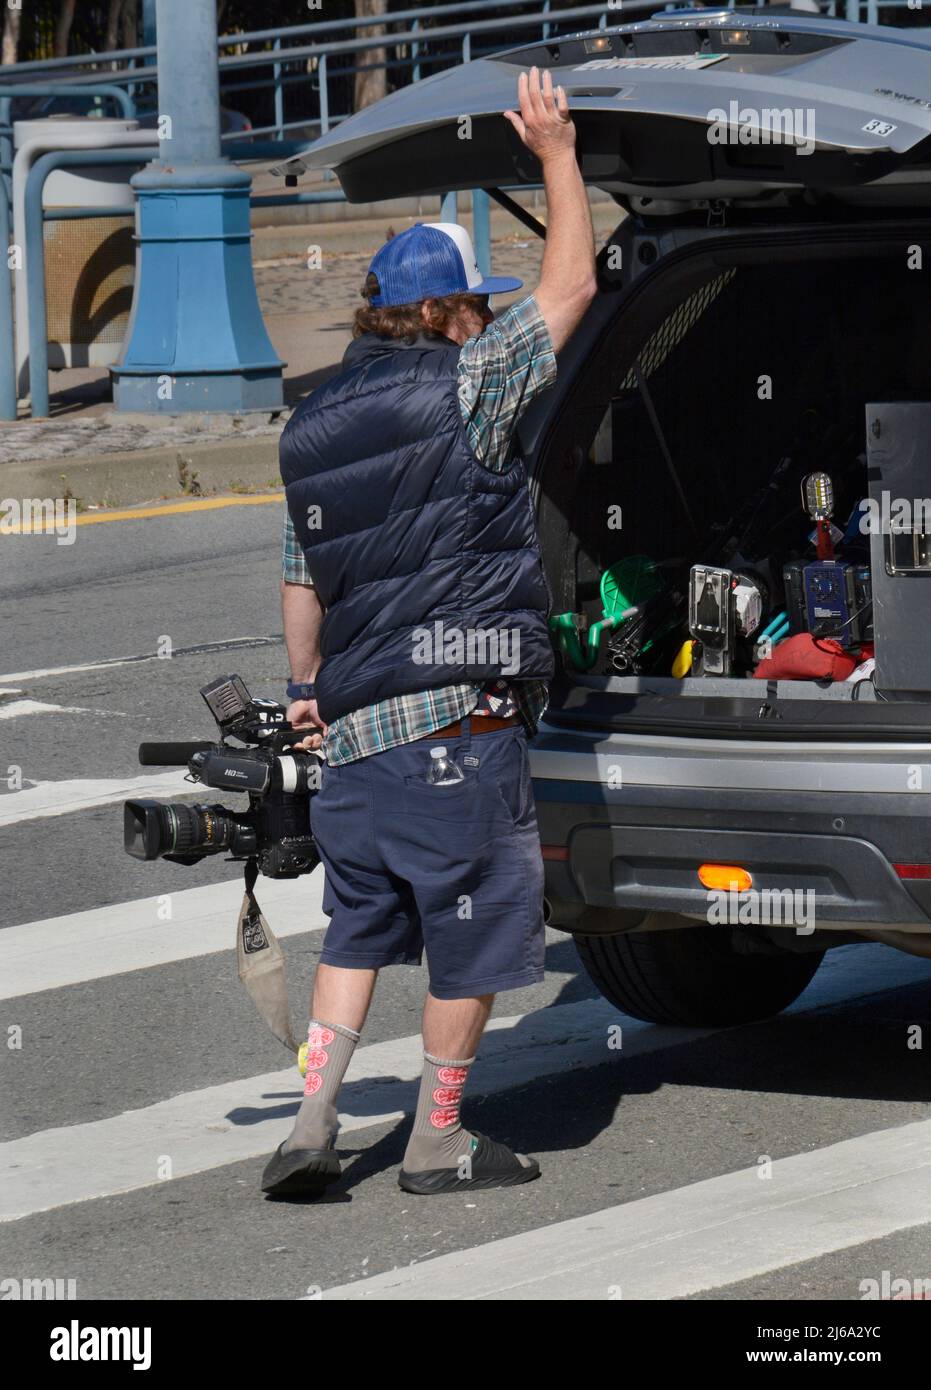 A television cameraman employed by KTVU-TV loads his Canon video camera in the trunk of his van after an assignment in San Francisco, California. Stock Photo